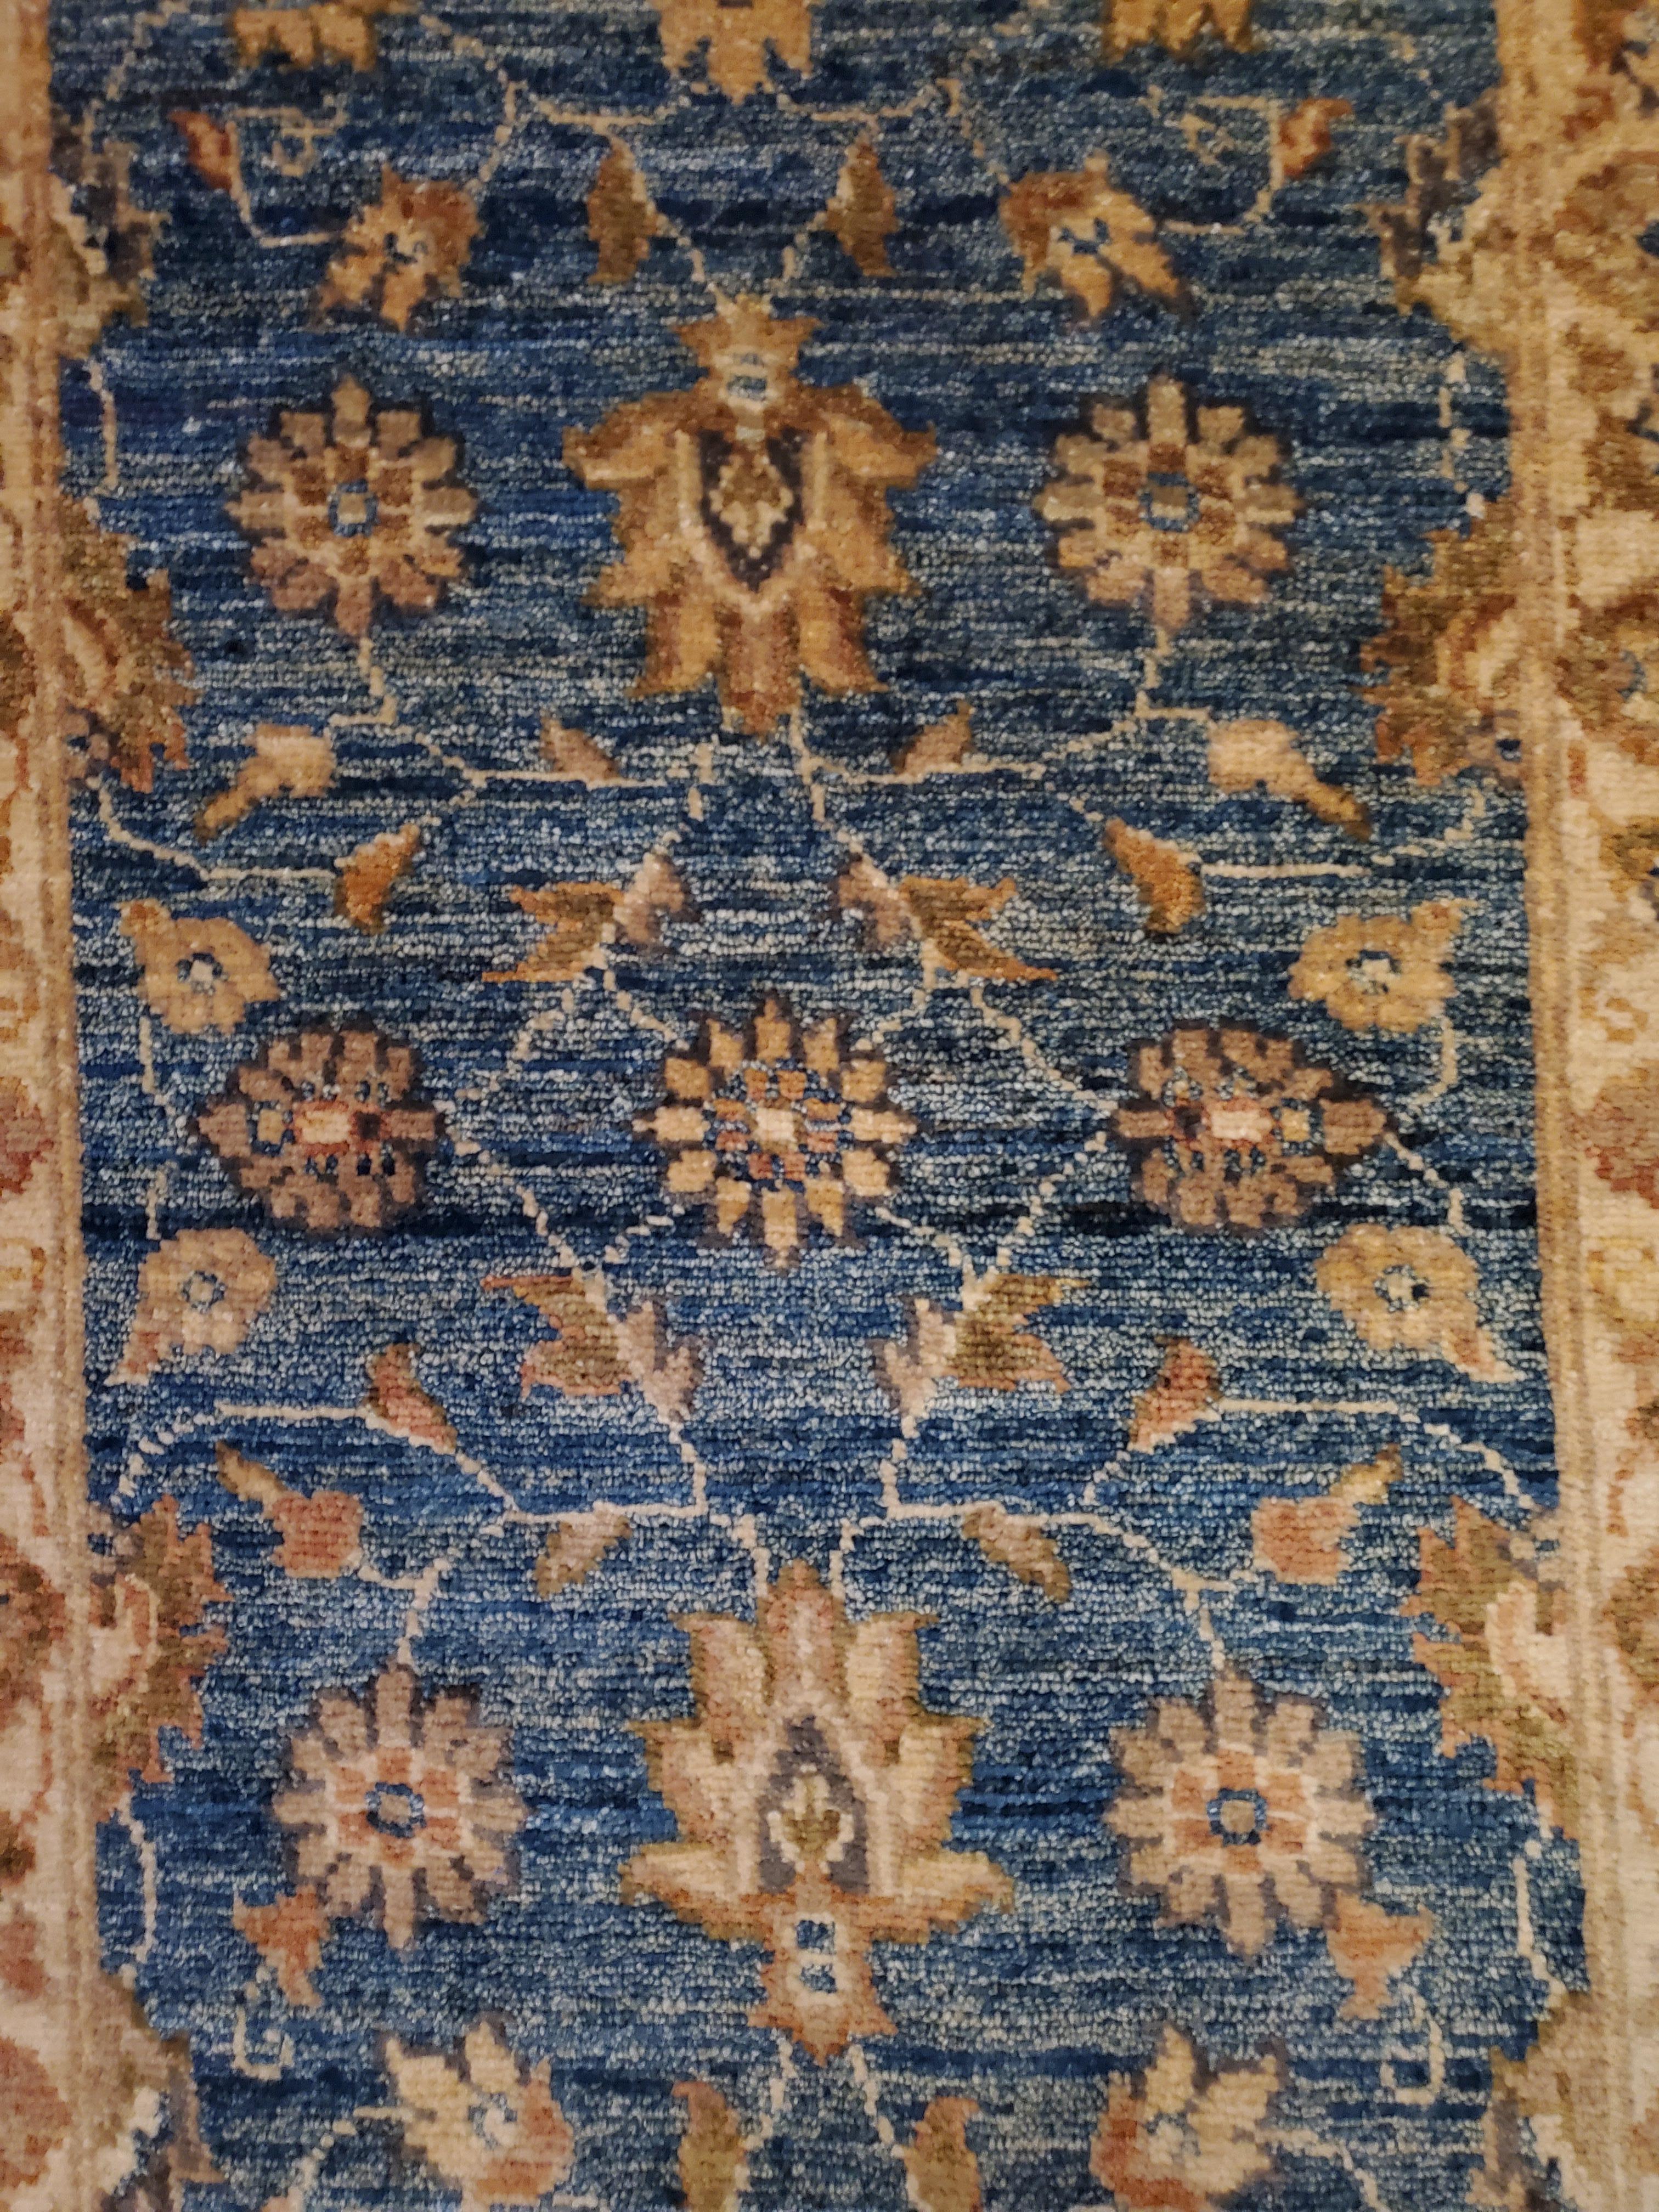 We carry some of the best Afghan bedside rugs, and if you are willing to give your space a colorful new look with one of our stunning carpets, we are here to help. This one measures approximately 36